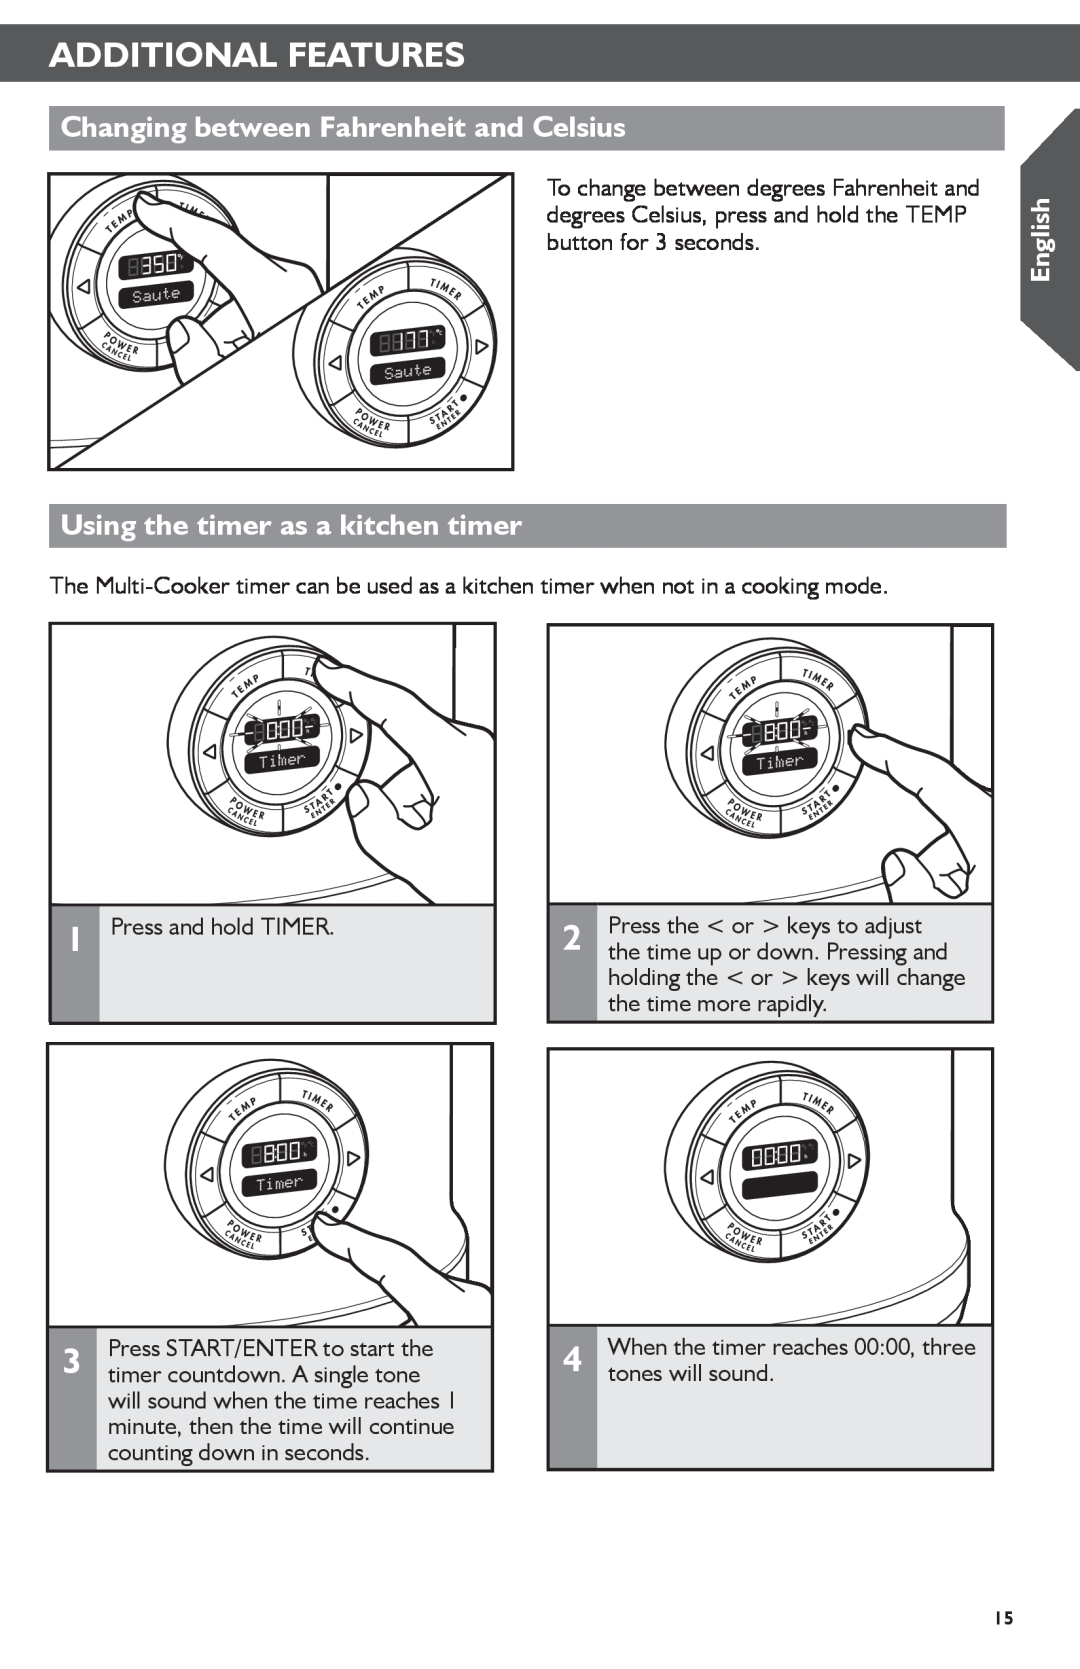 KitchenAid KMC4241 manual Changing between Fahrenheit and Celsius, Using the timer as a kitchen timer, Additional Features 